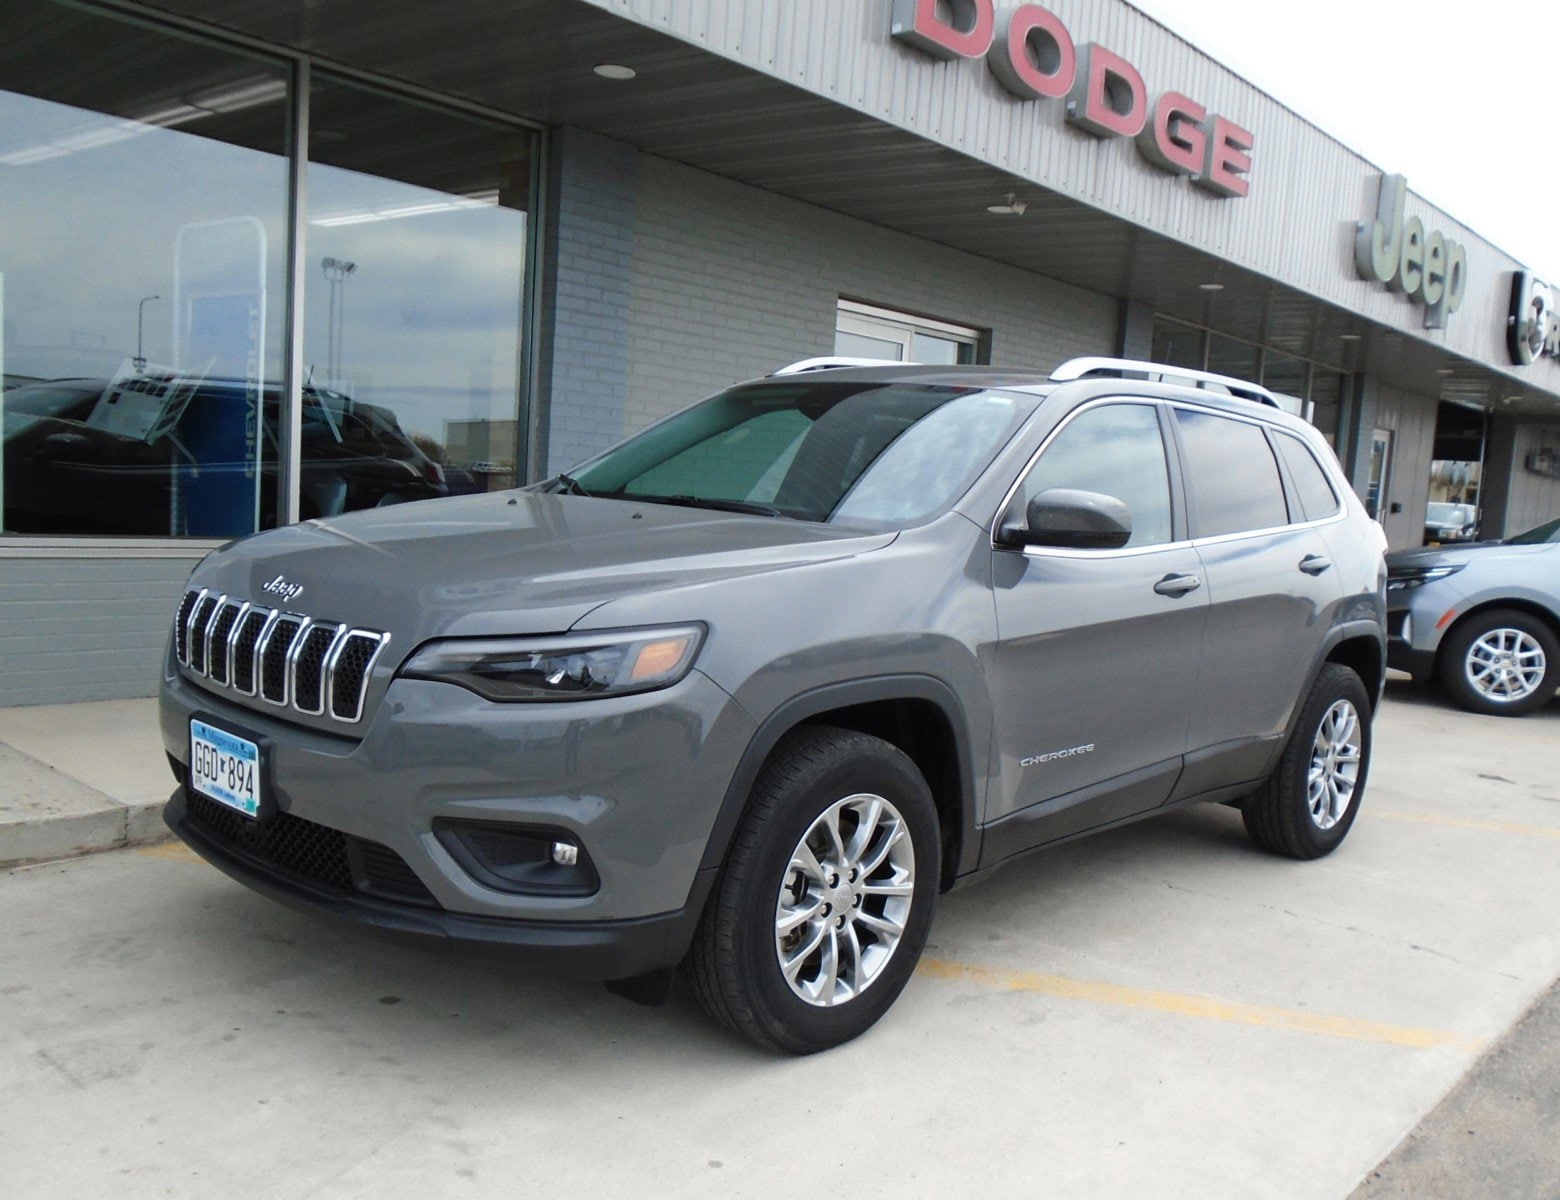 Used 2021 Jeep Cherokee Latitude Lux with VIN 1C4PJMMX1MD171395 for sale in Sauk Centre, Minnesota